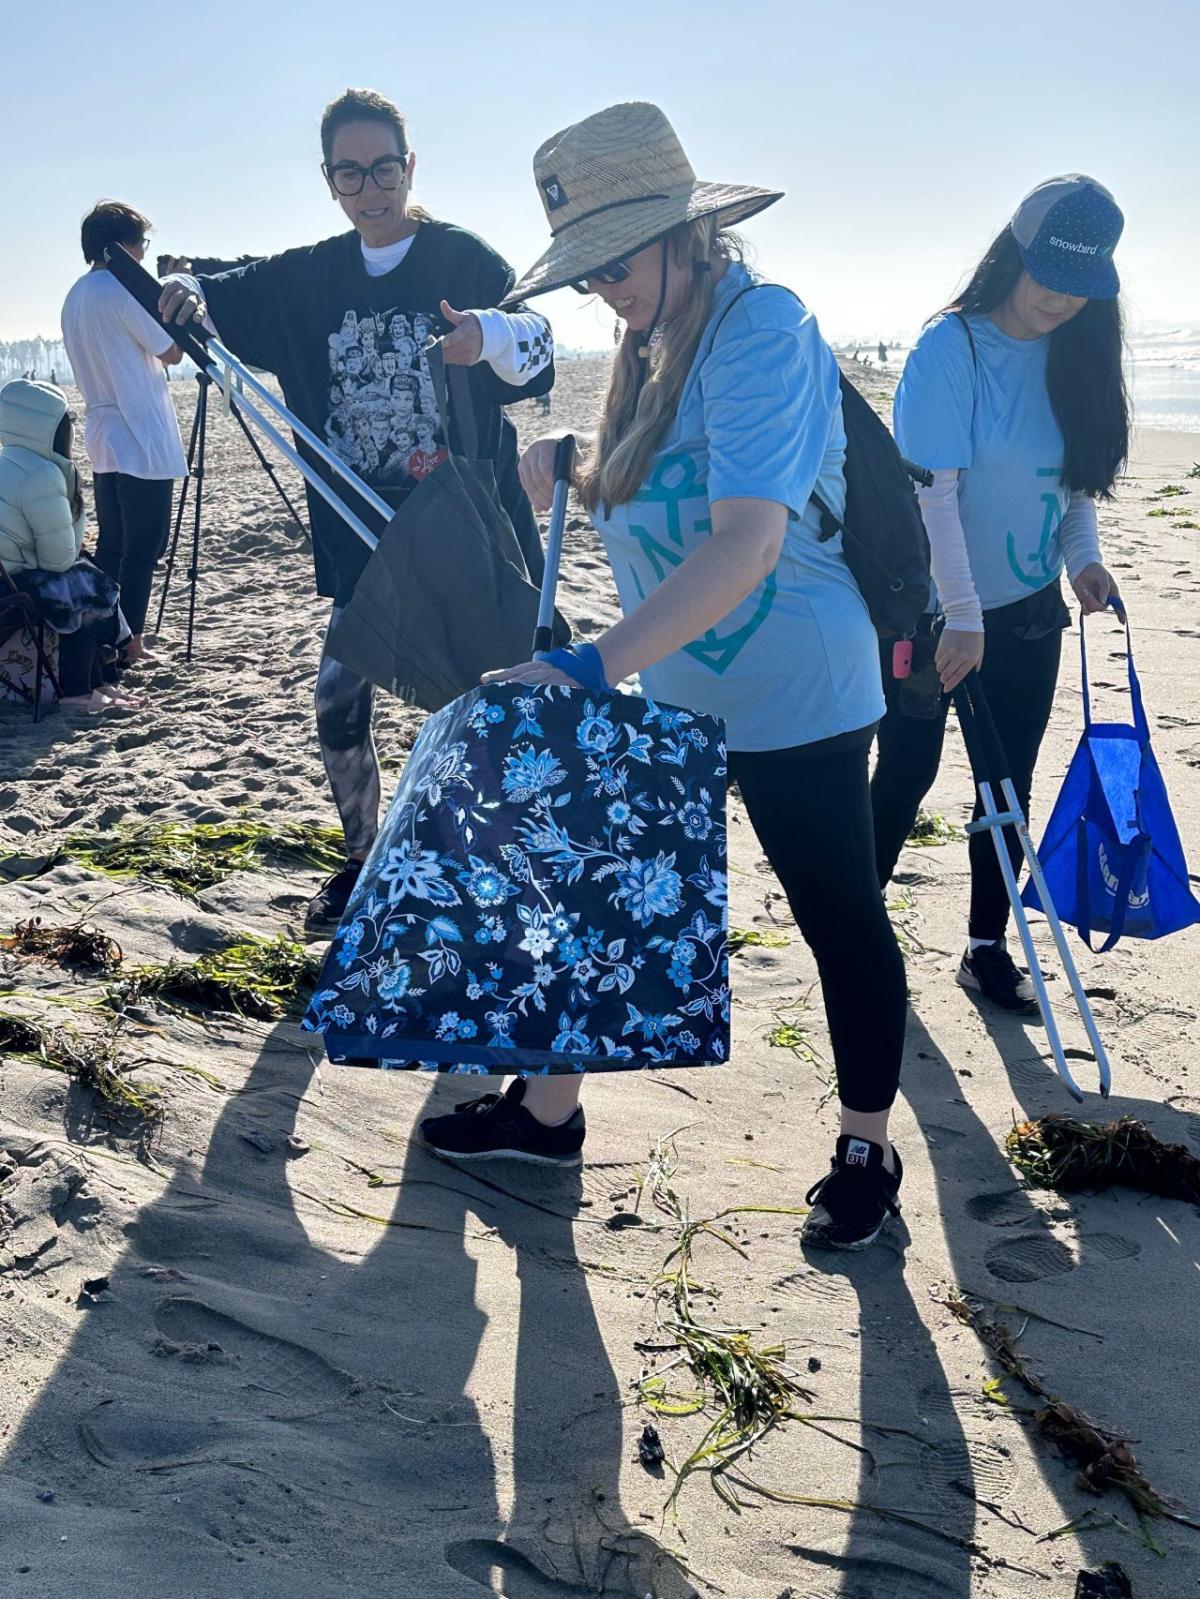 A group of volunteers cleaning up a beach.